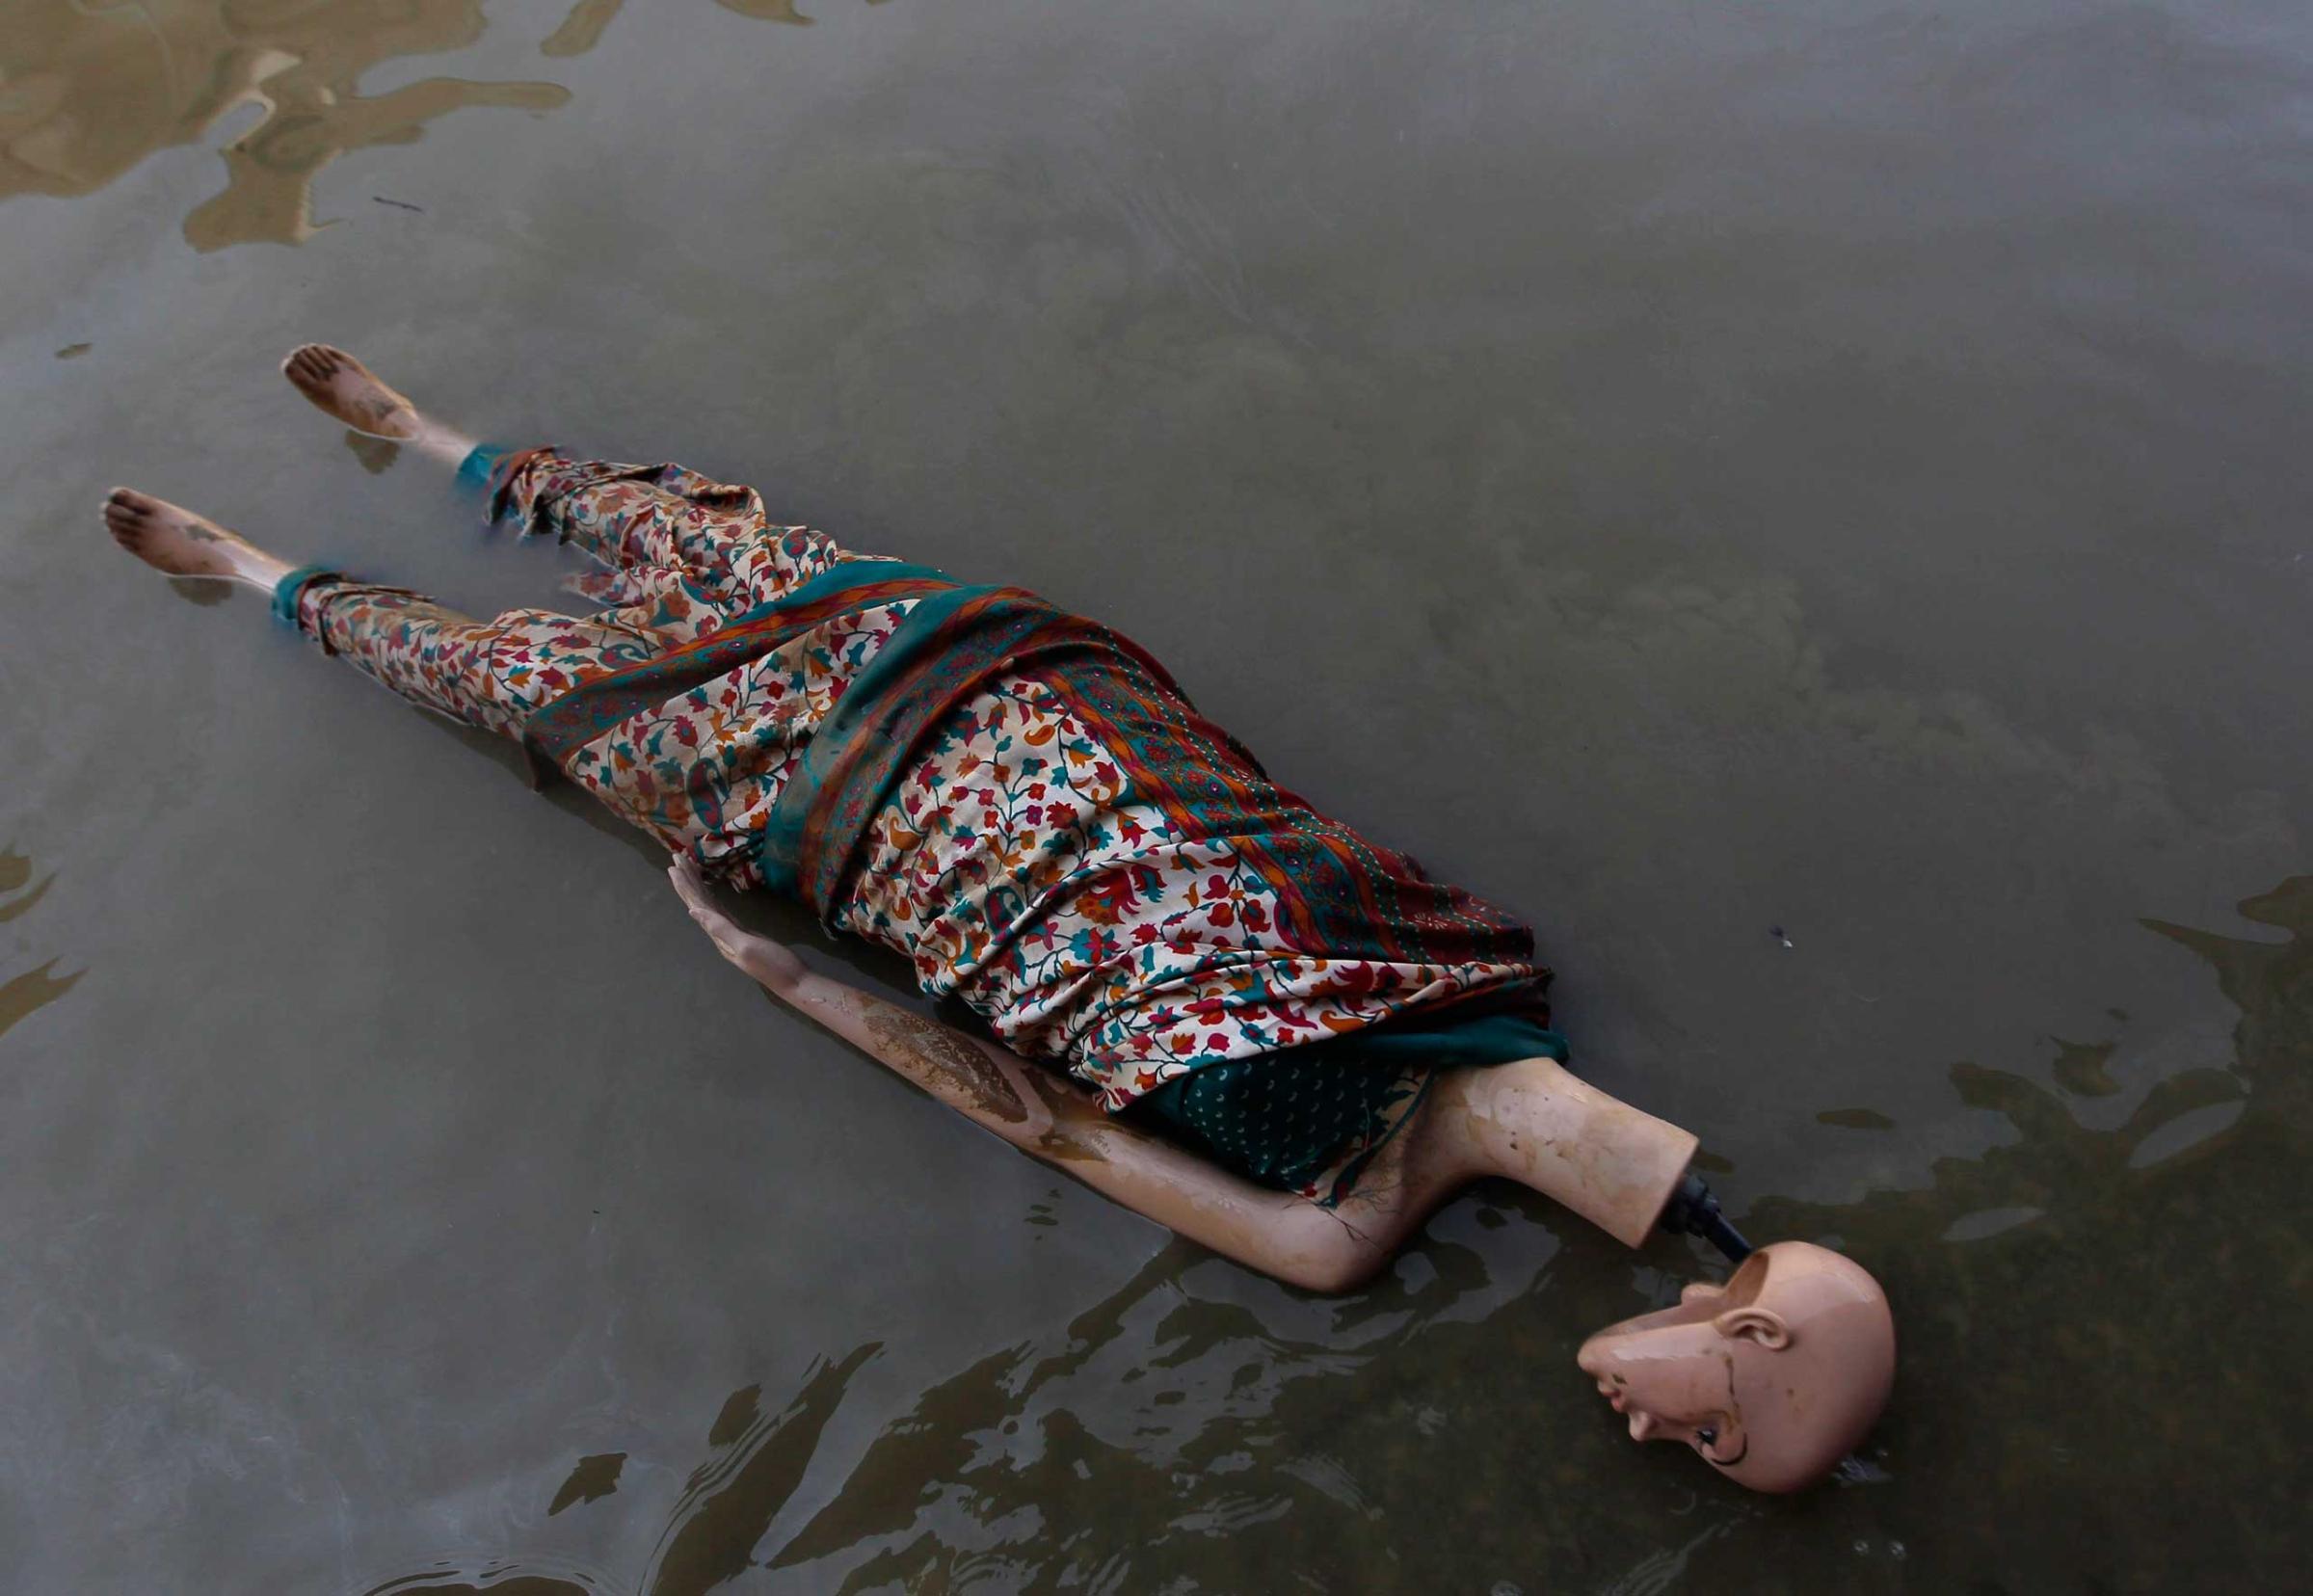 A mannequin floats in the floodwaters along a street in Srinagar